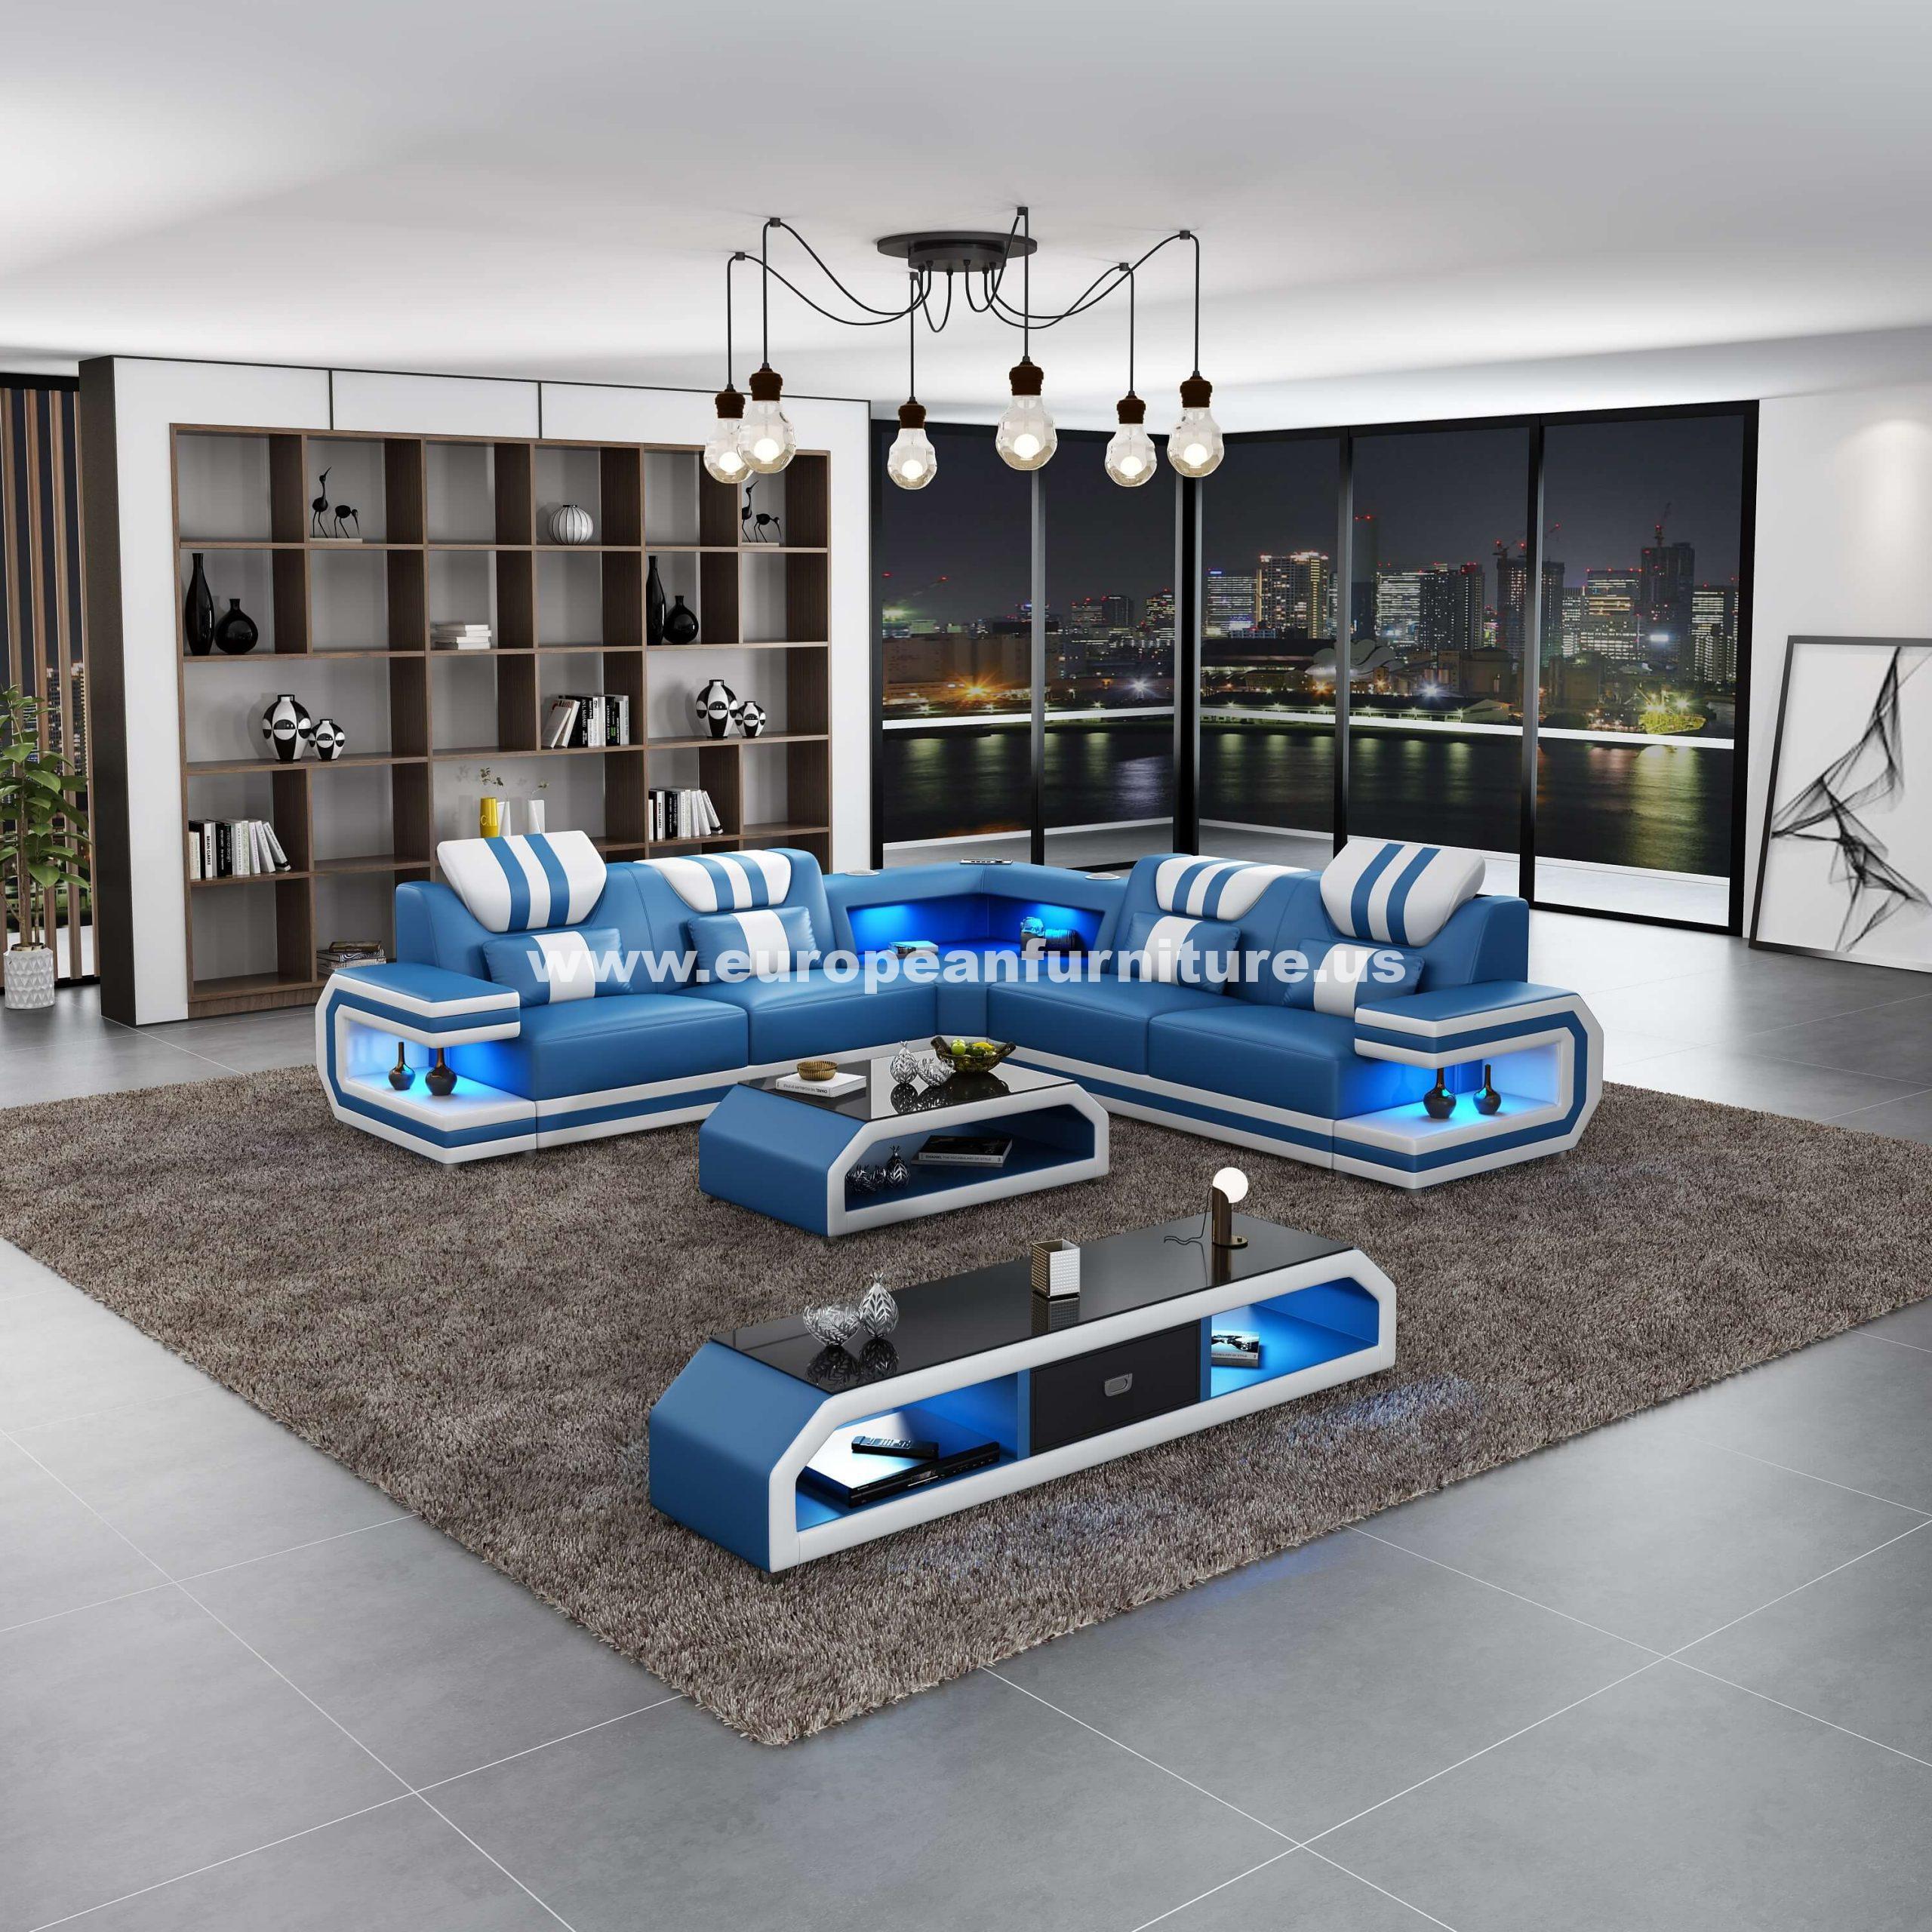 Contemporary, Modern Sectional Sofa LIGHTSABER LED-87772-BWLU in White, Blue Italian Leather